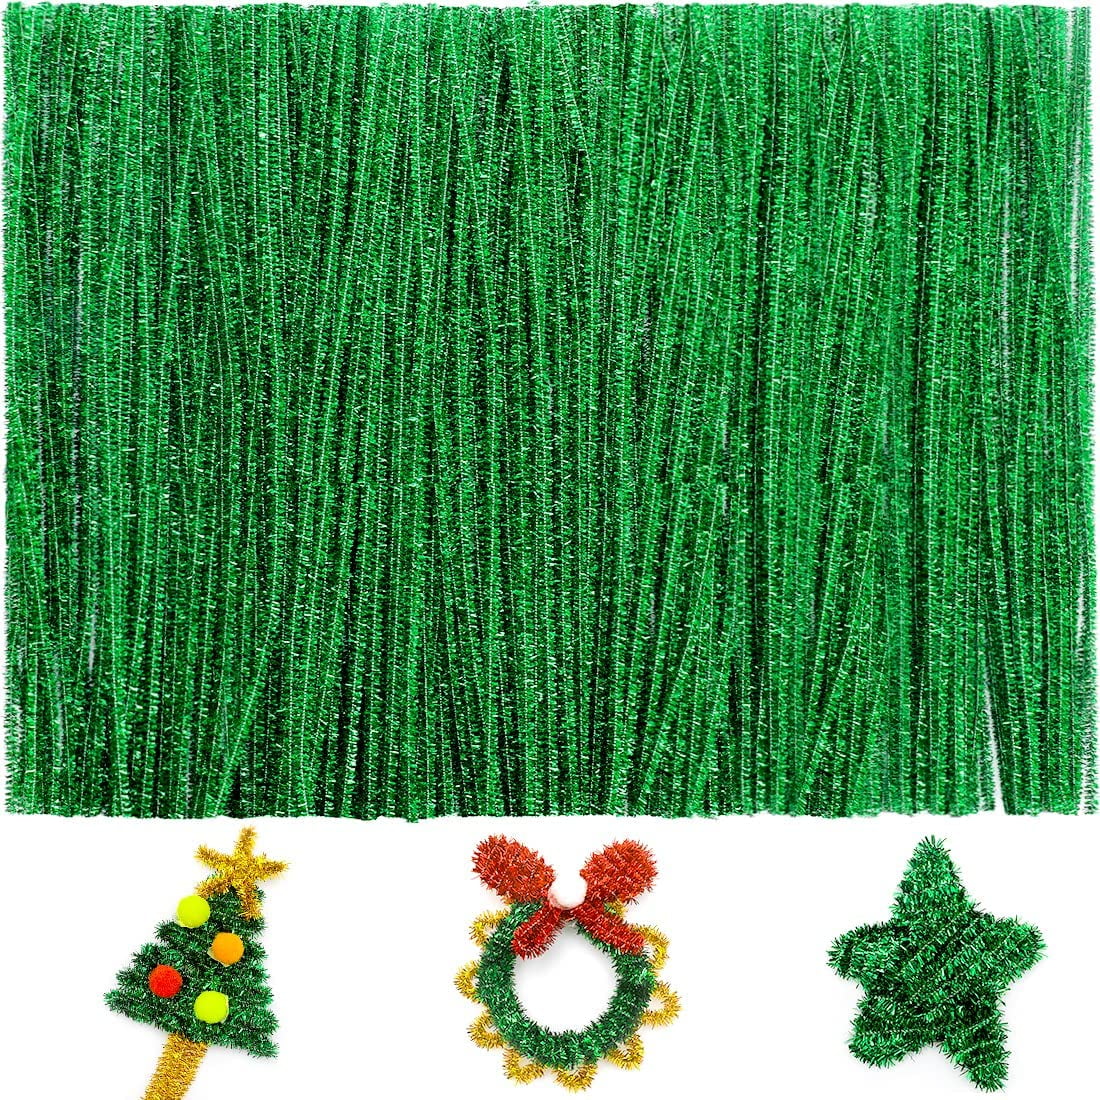 200psc Green Pipe Cleaners, Chenille Stems, Pipe Cleaners for Crafts, Pipe  Cleaner Crafts, Art and Craft Supplies. 